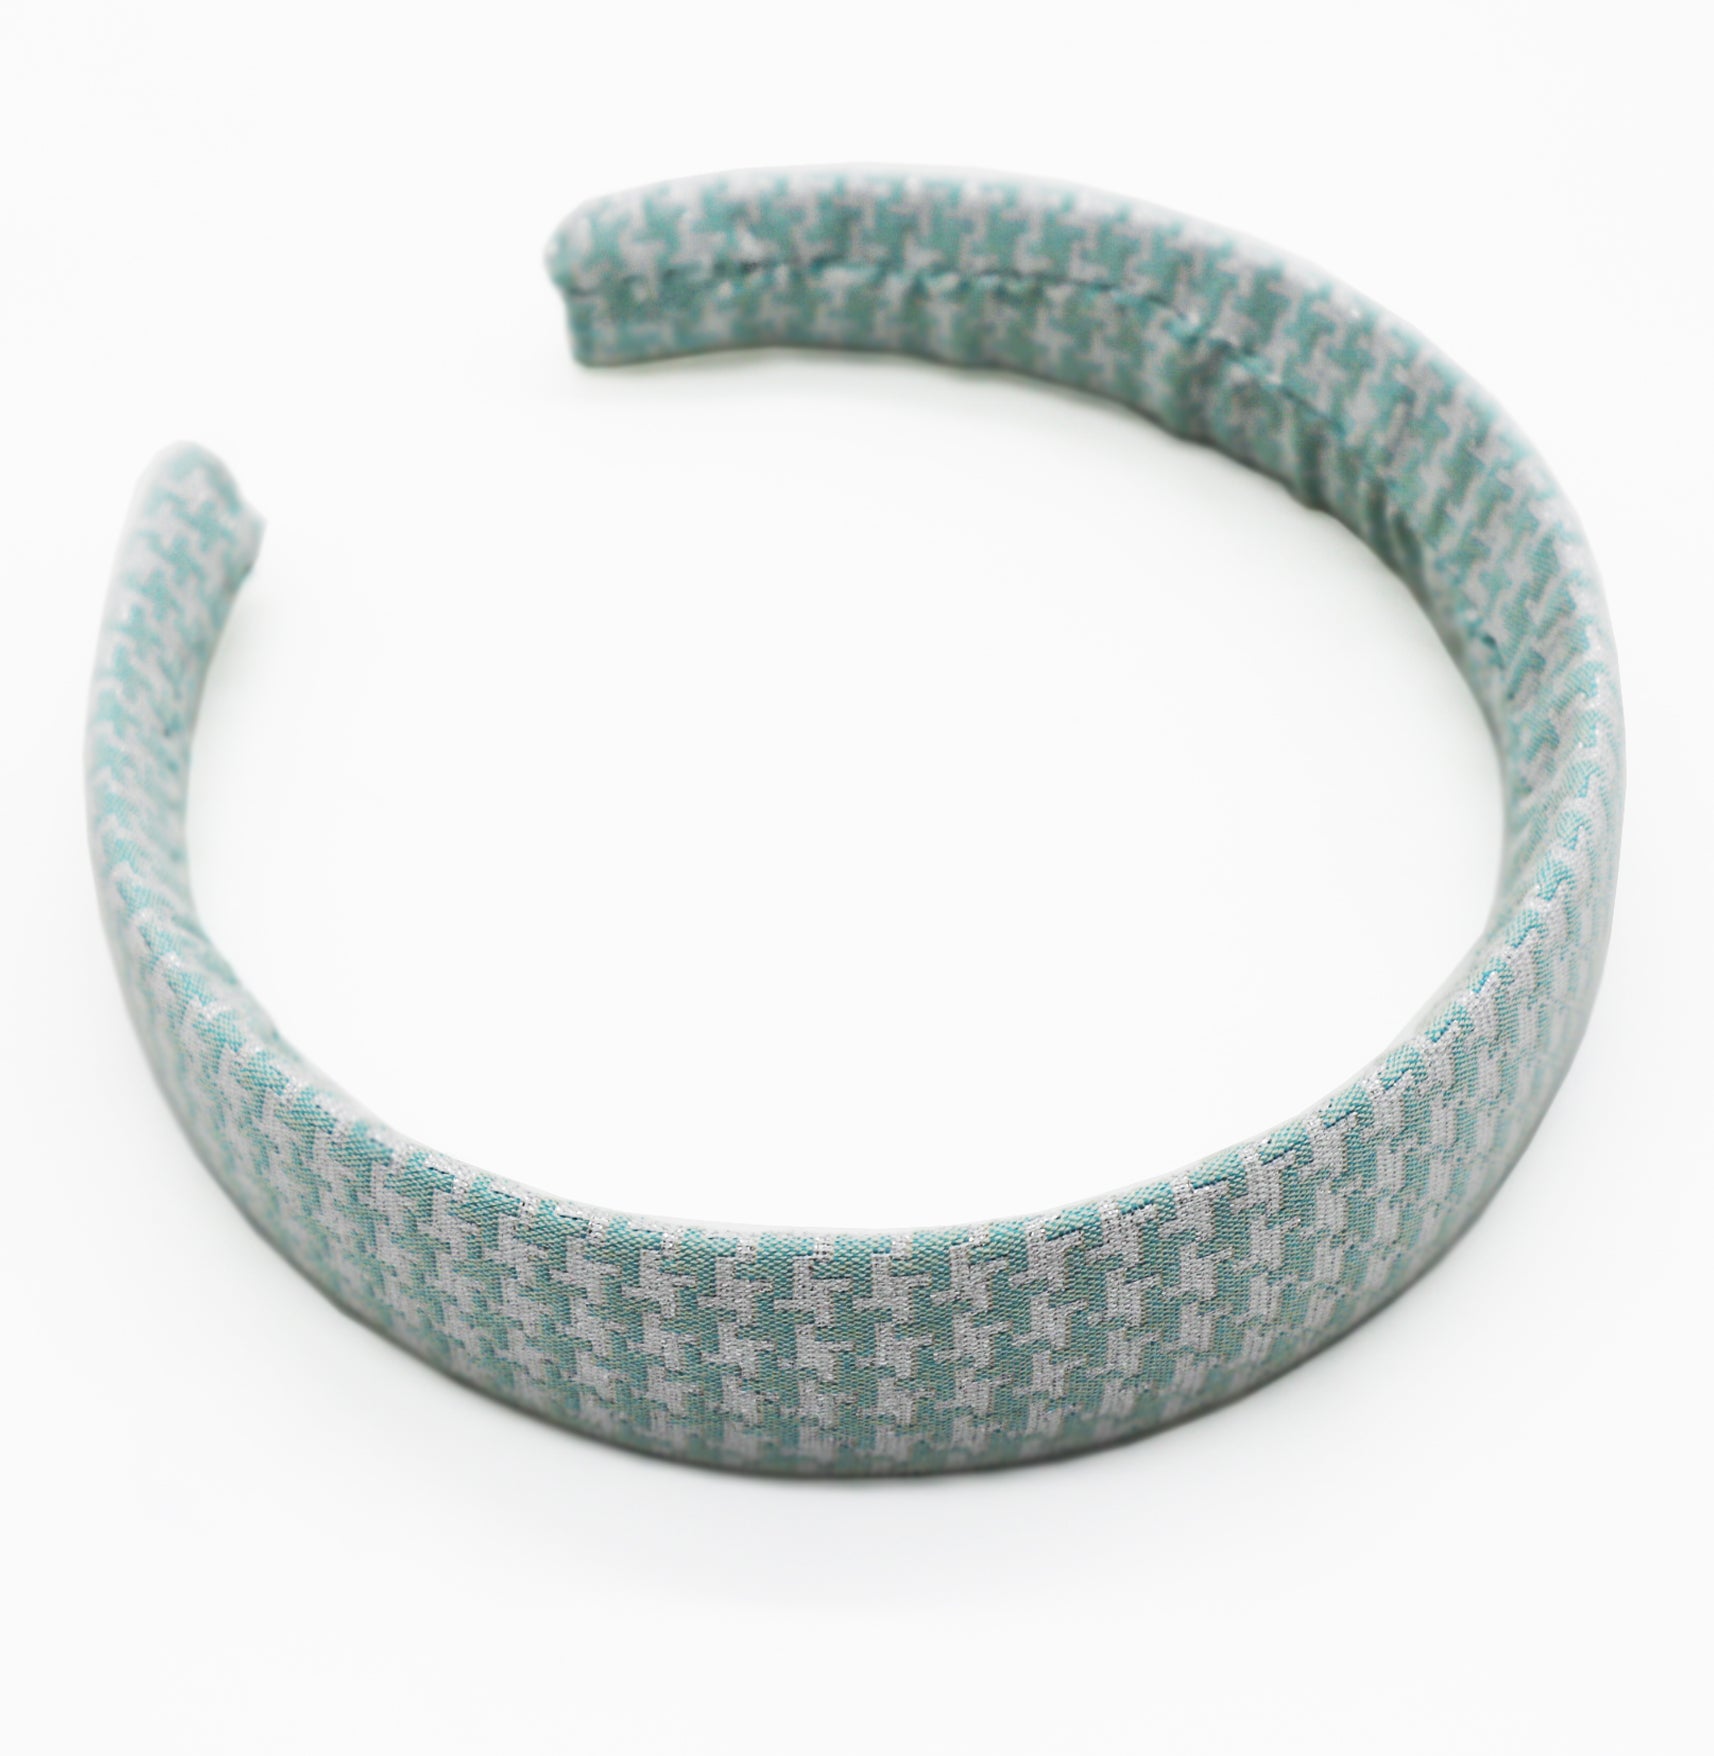 The Popping Candy mint headband